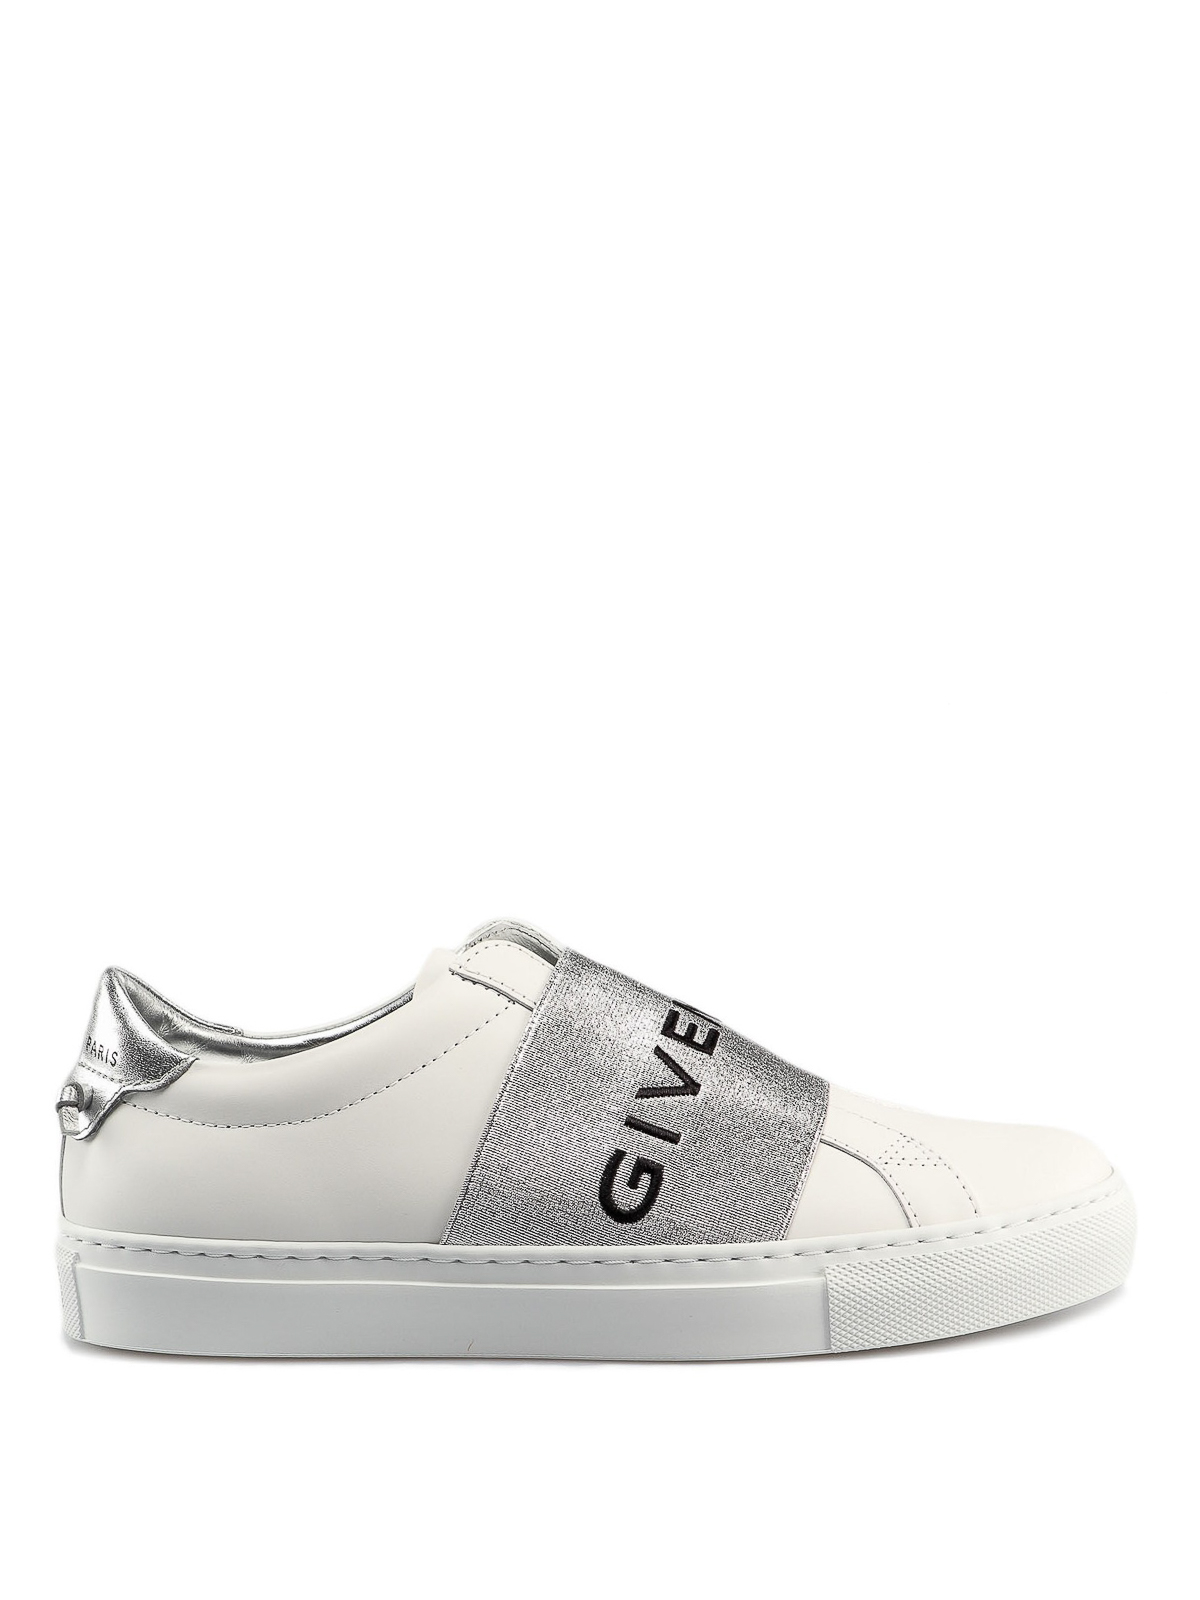 Trainers Givenchy - Branded band white leather sneakers - BE0005E0BG040